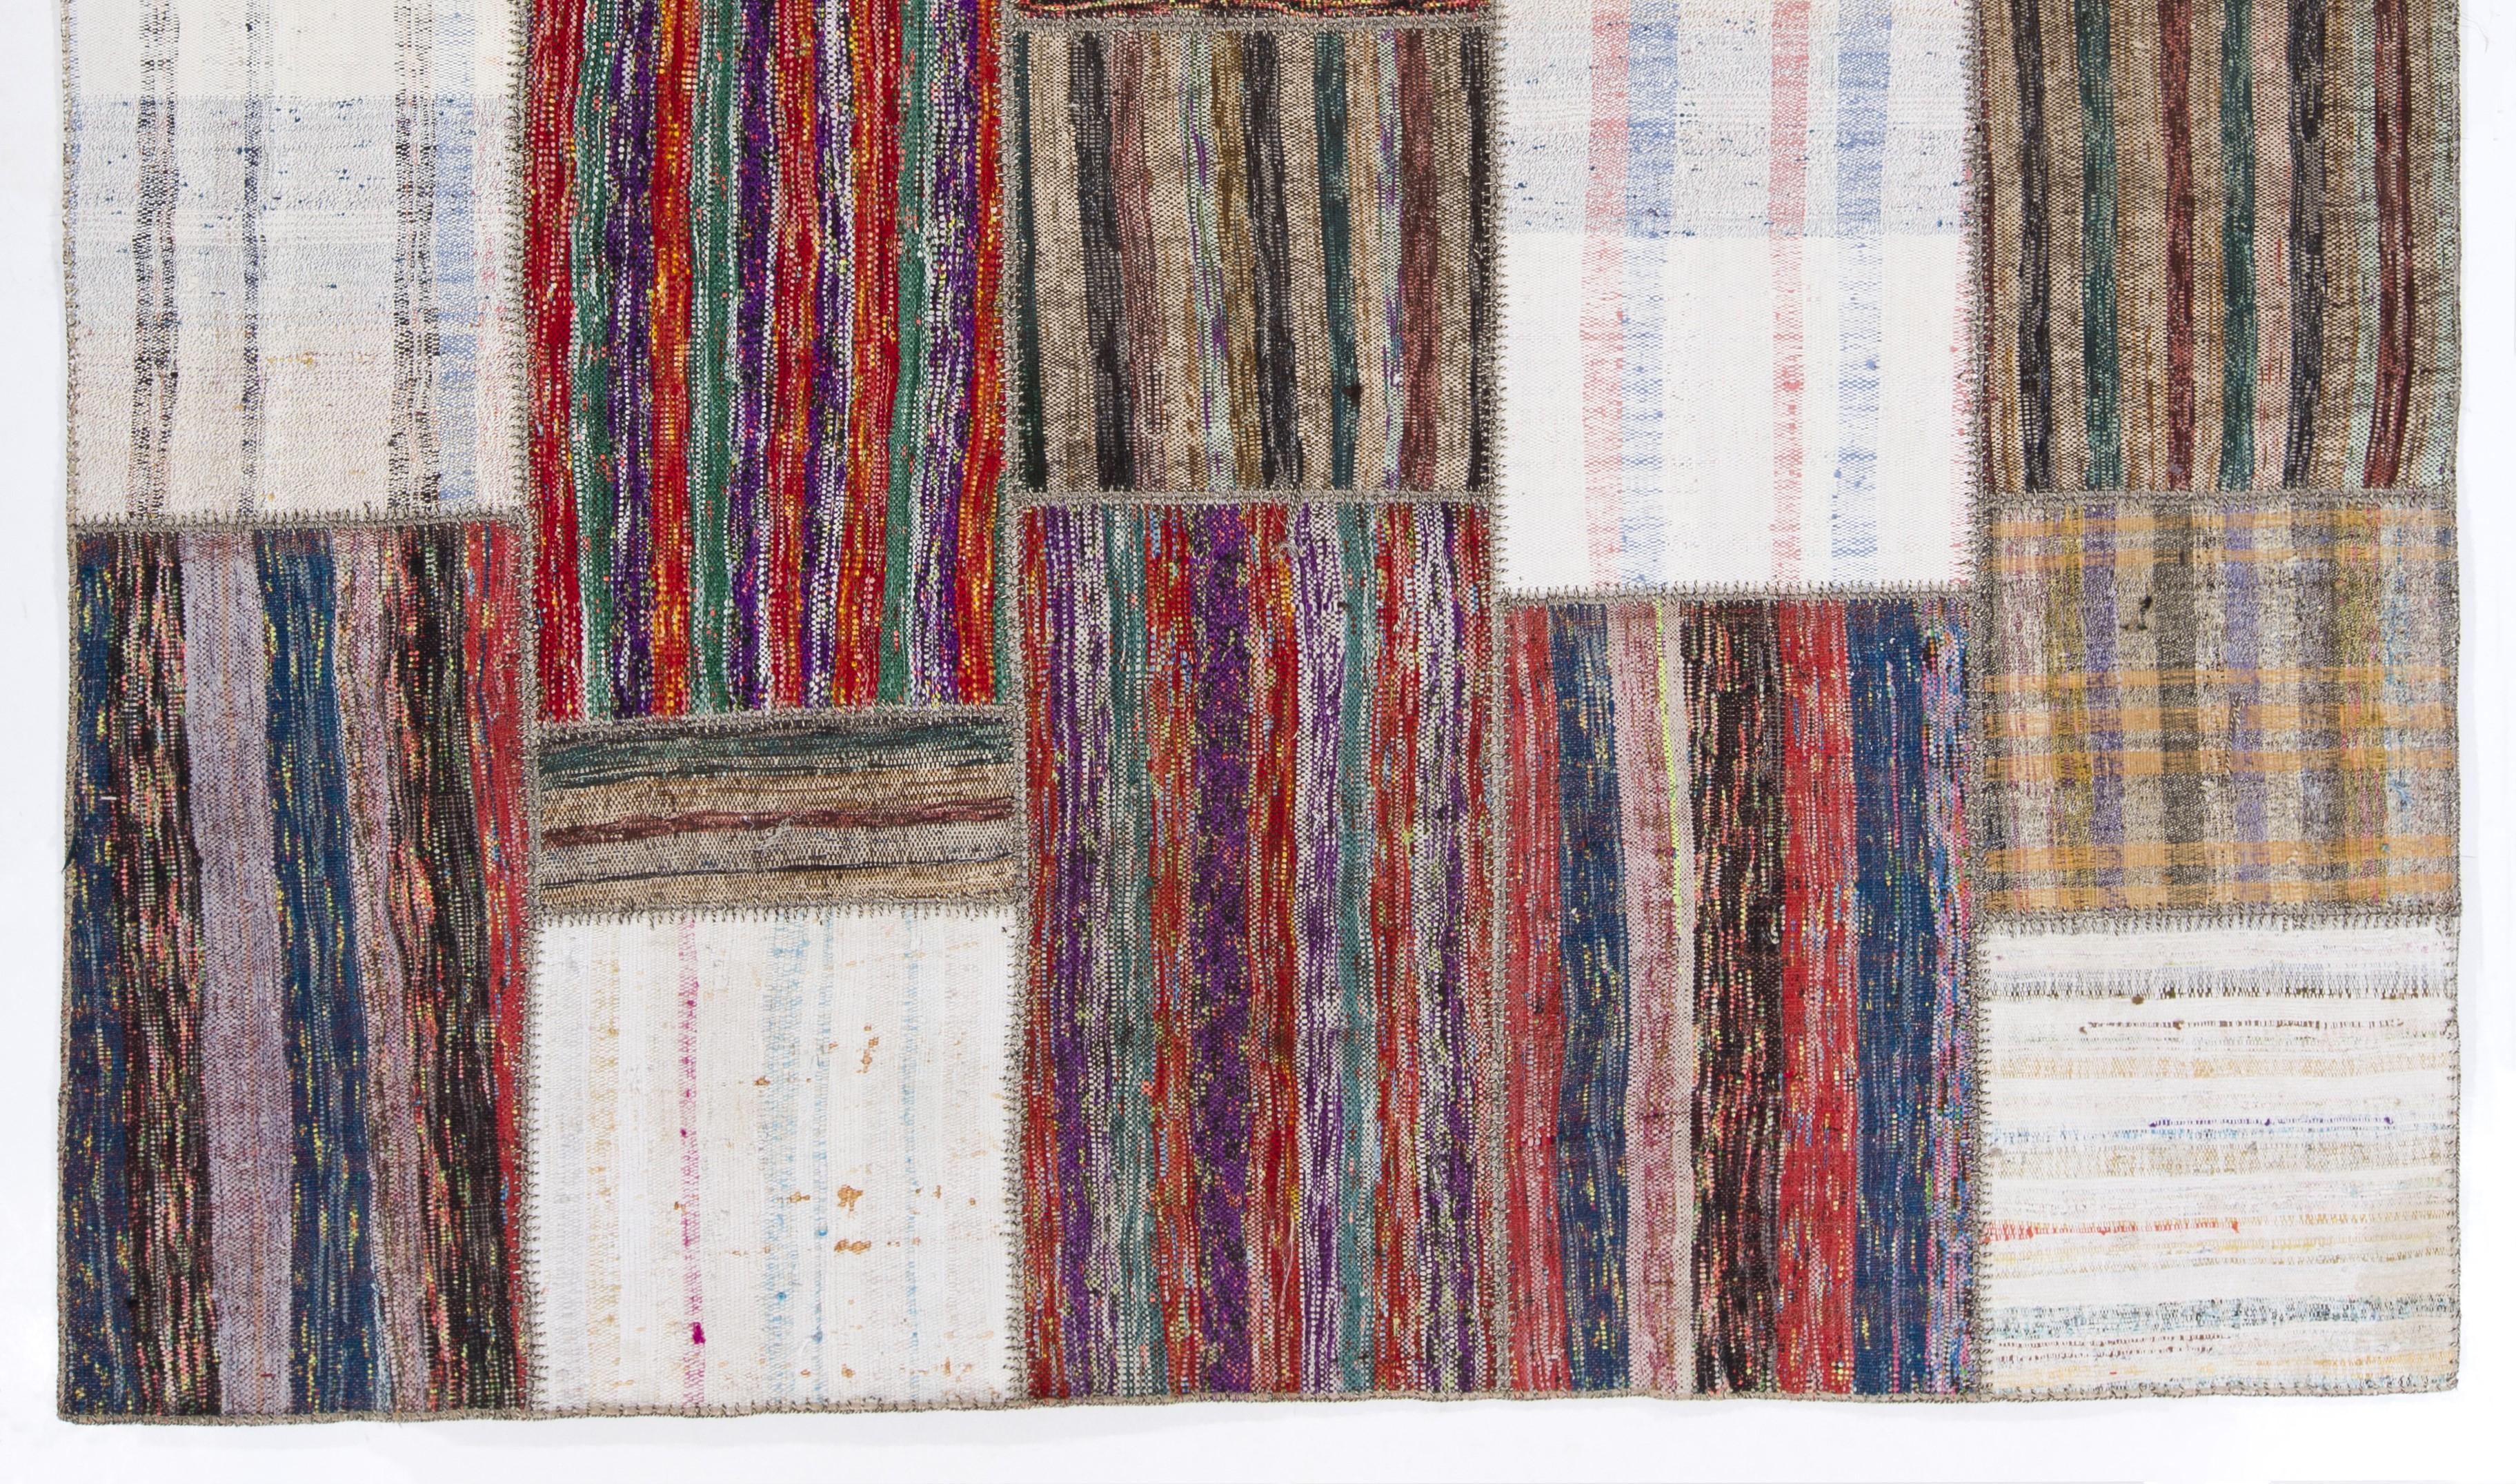 Hand-Woven Handmade Vintage Striped Turkish Kilims Re-Imagined, Custom Options Available For Sale